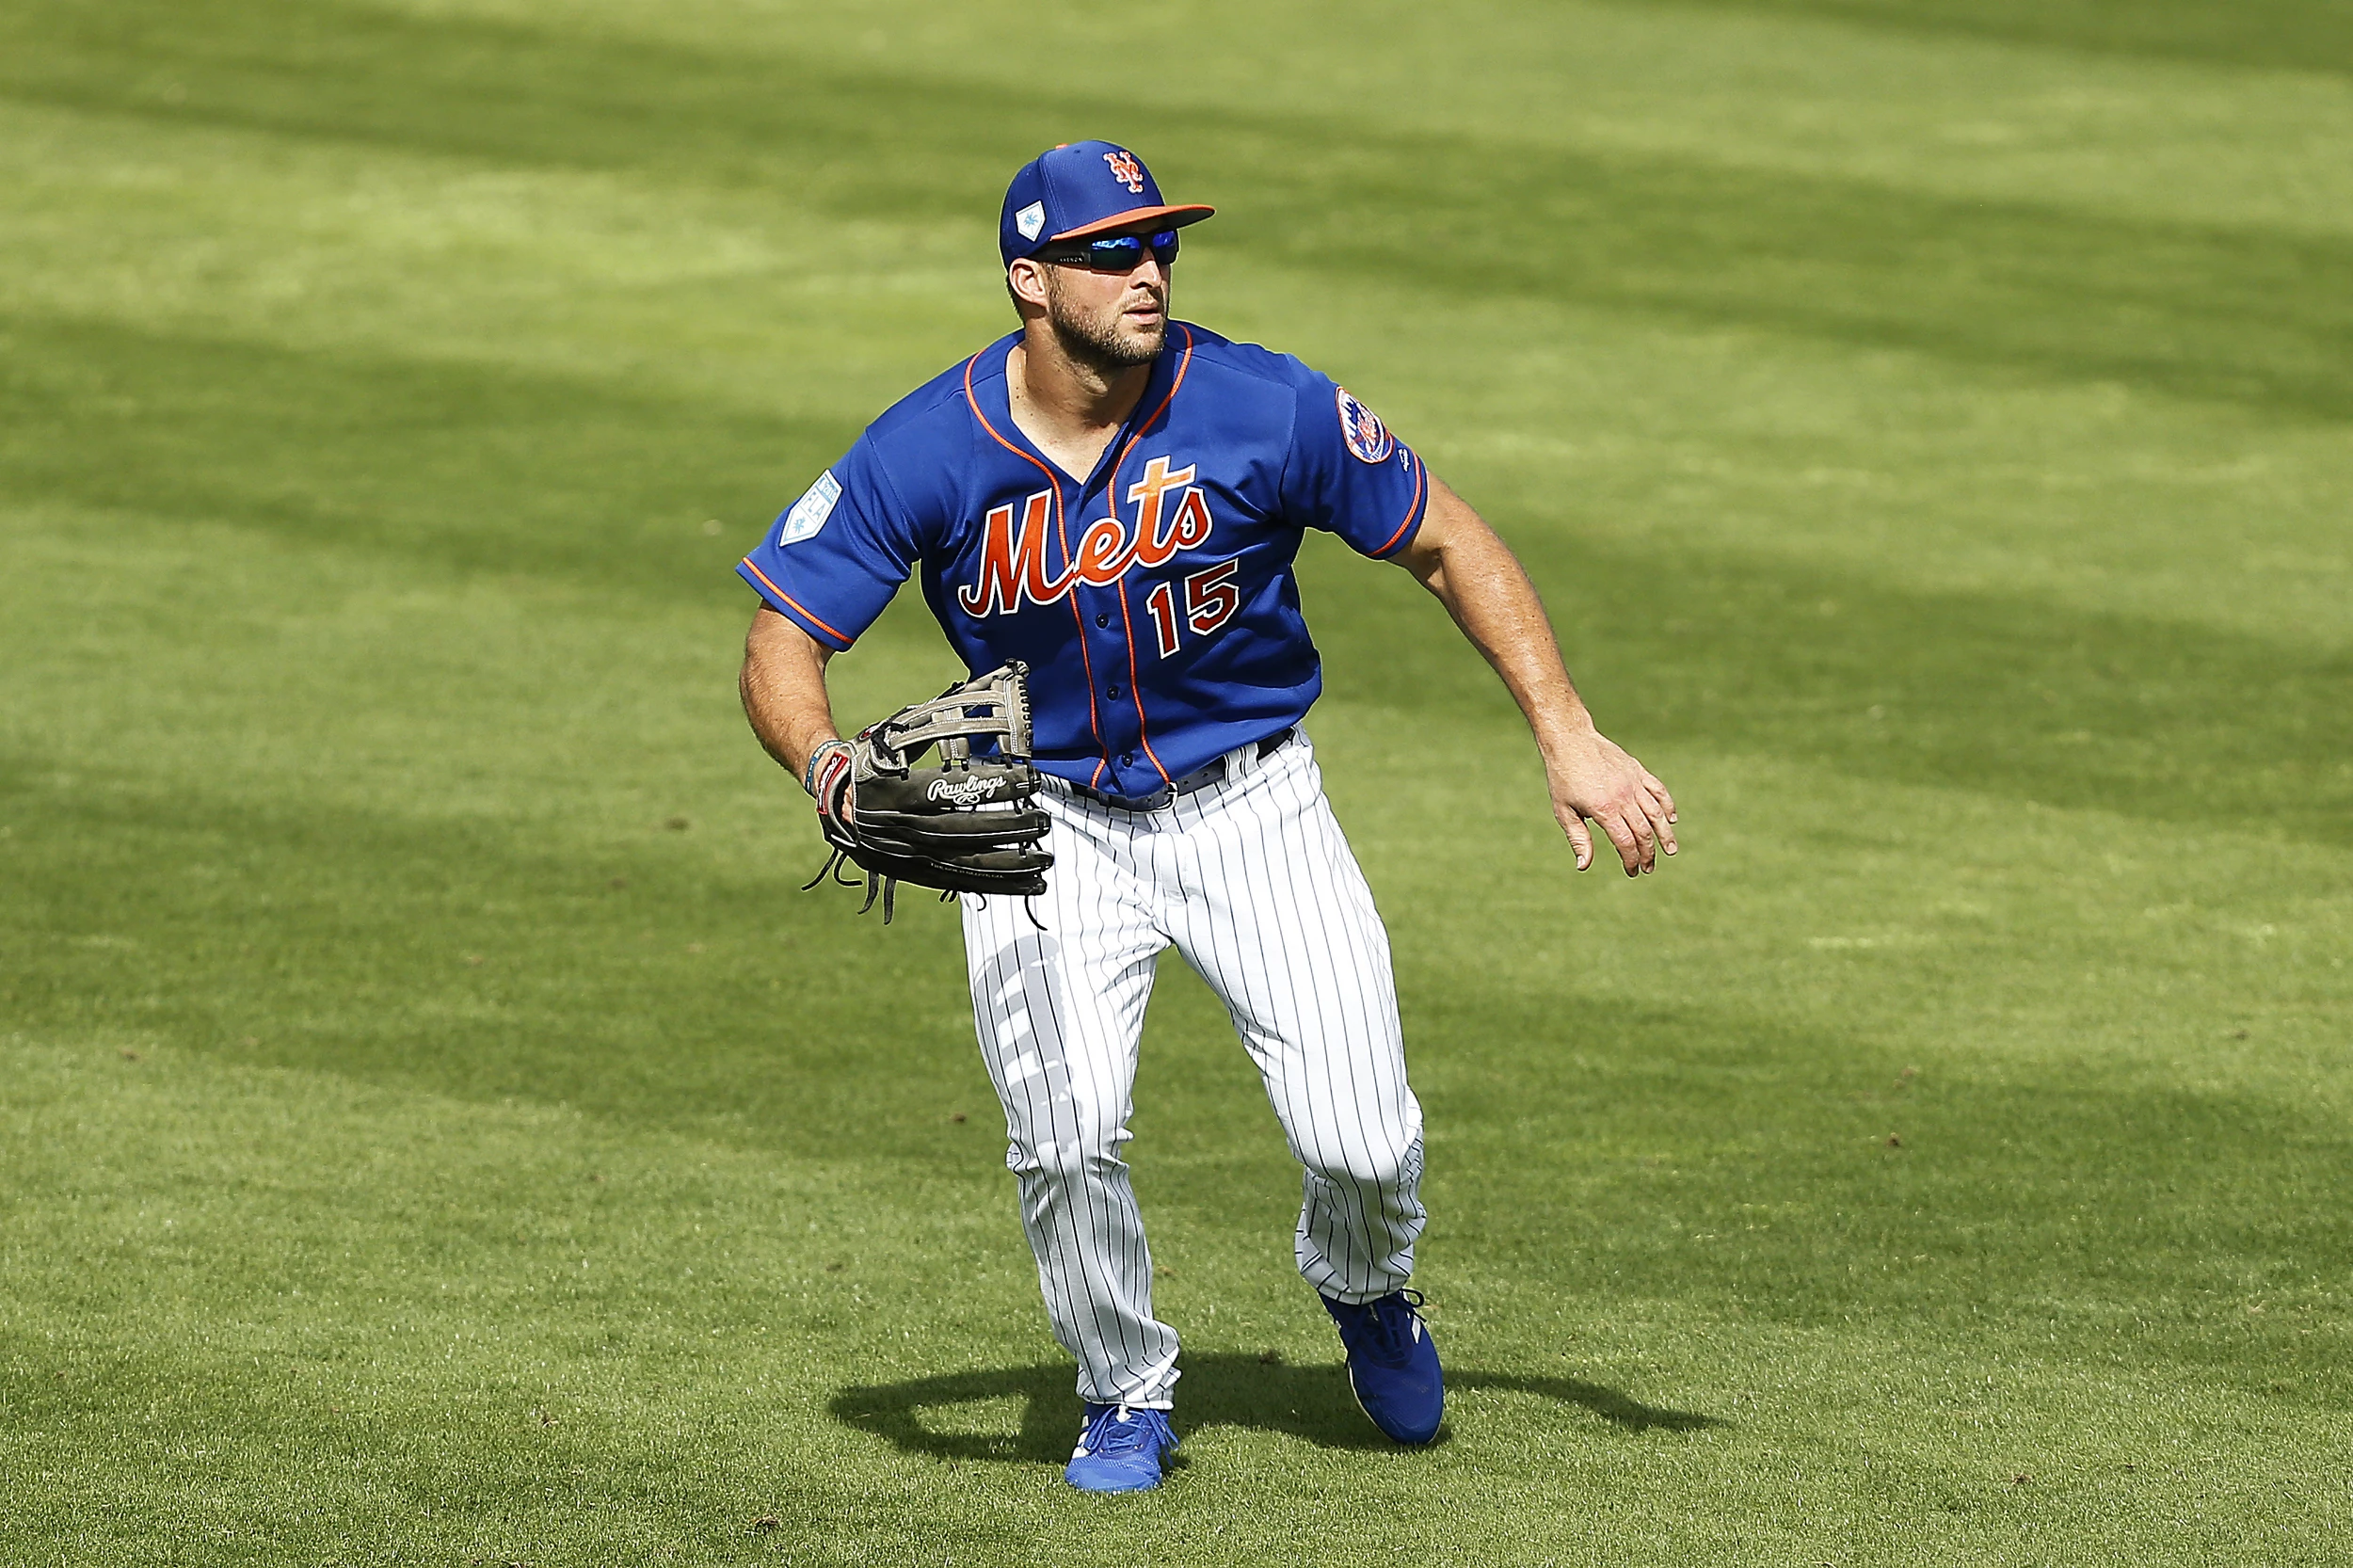 Tim Tebow retires from baseball after five years with Mets - NBC